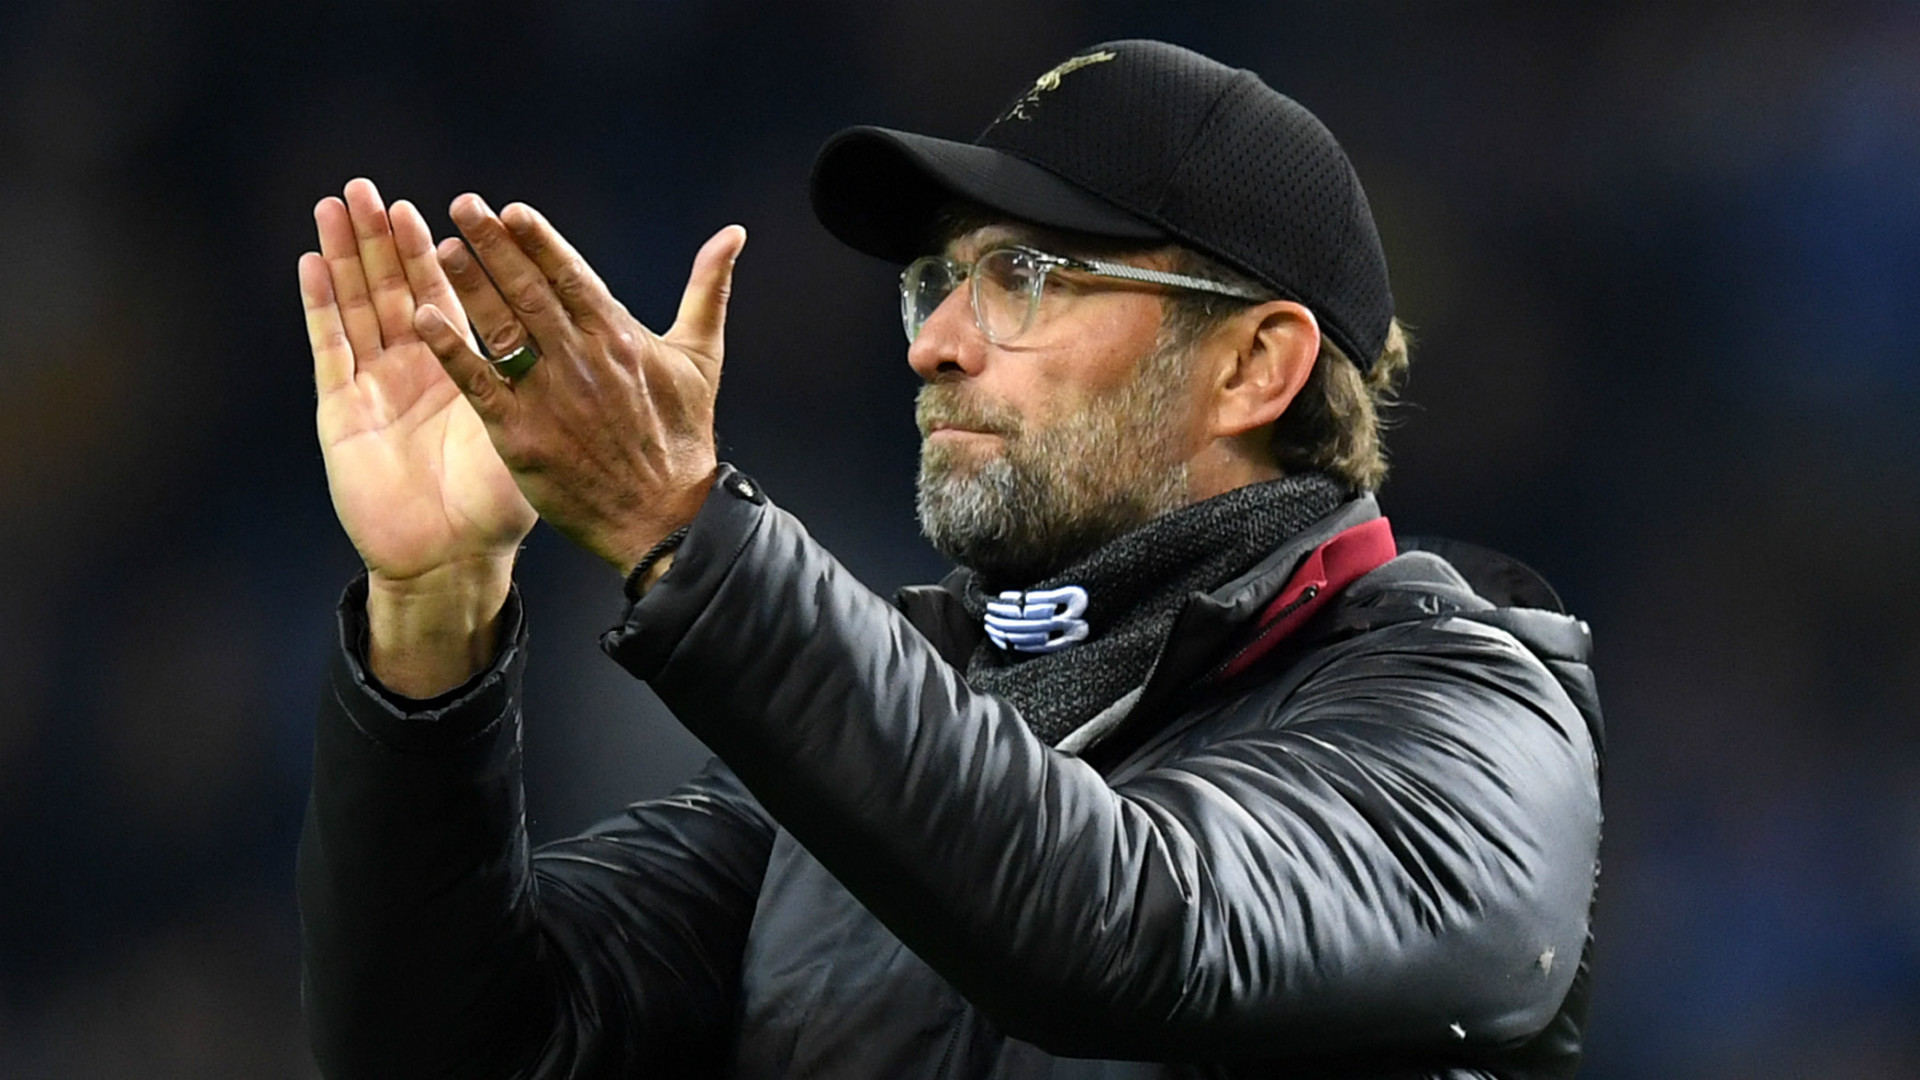 Liverpool must spend again and ‘keep on improving squad’, says Berger